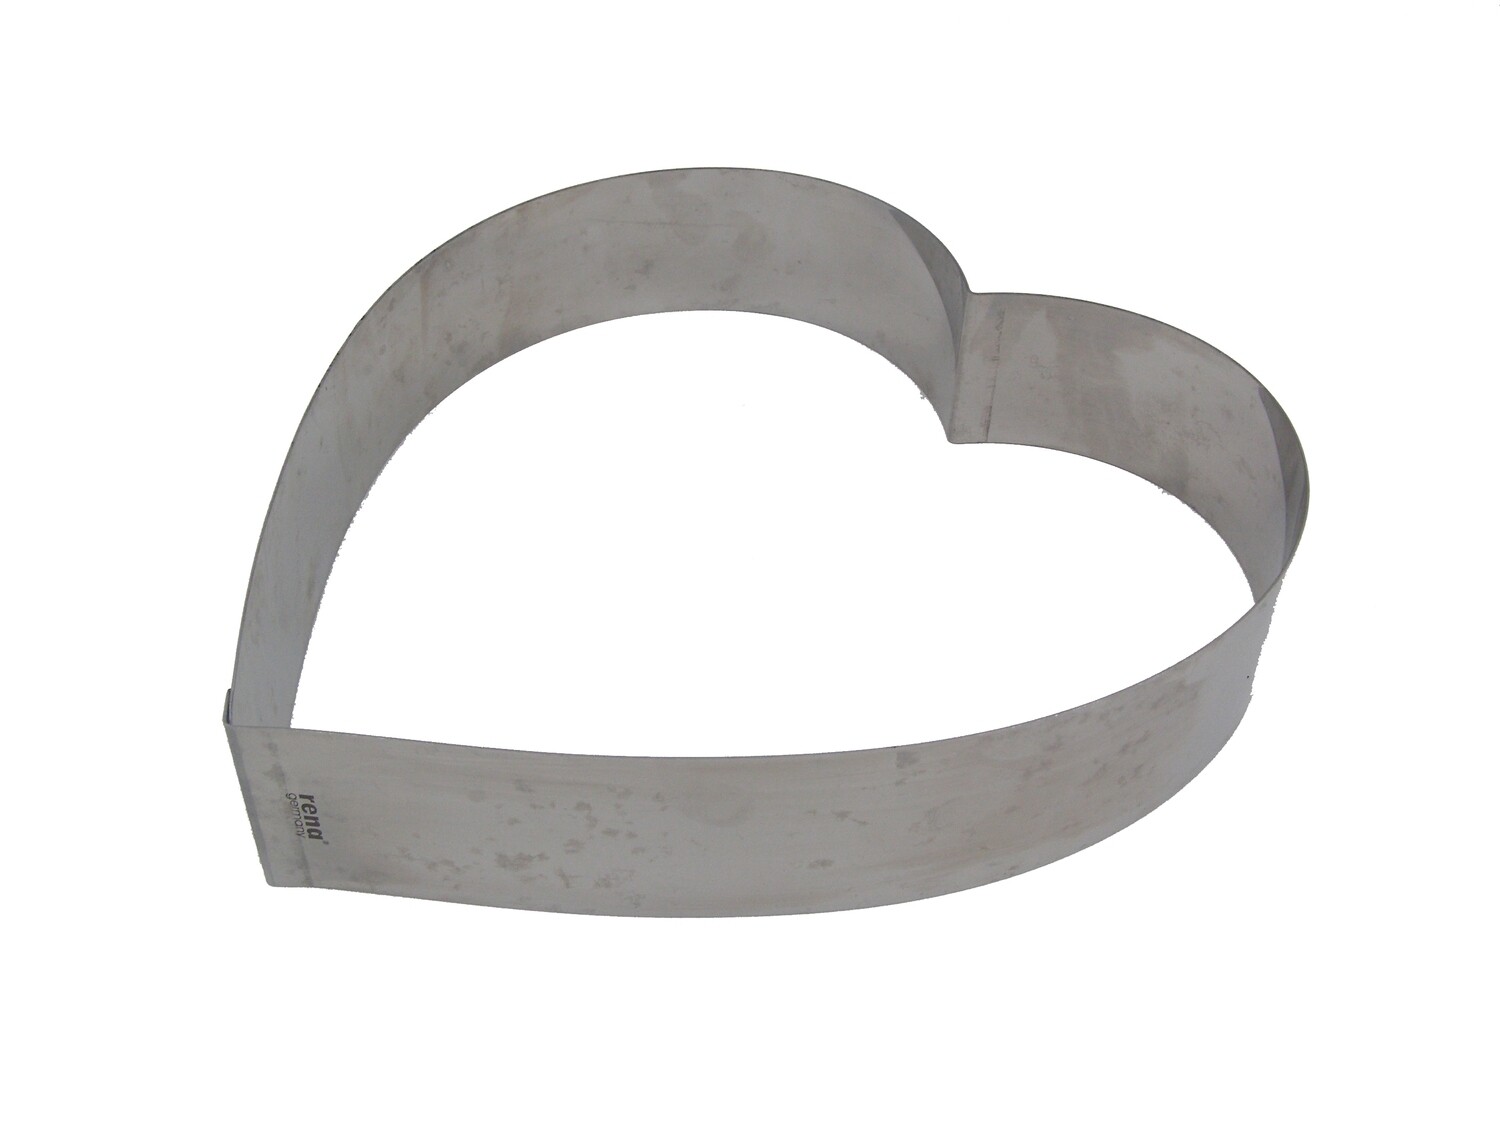 WELCOME RENA 120X50MM HEART SHAPE CAKE RING 40051